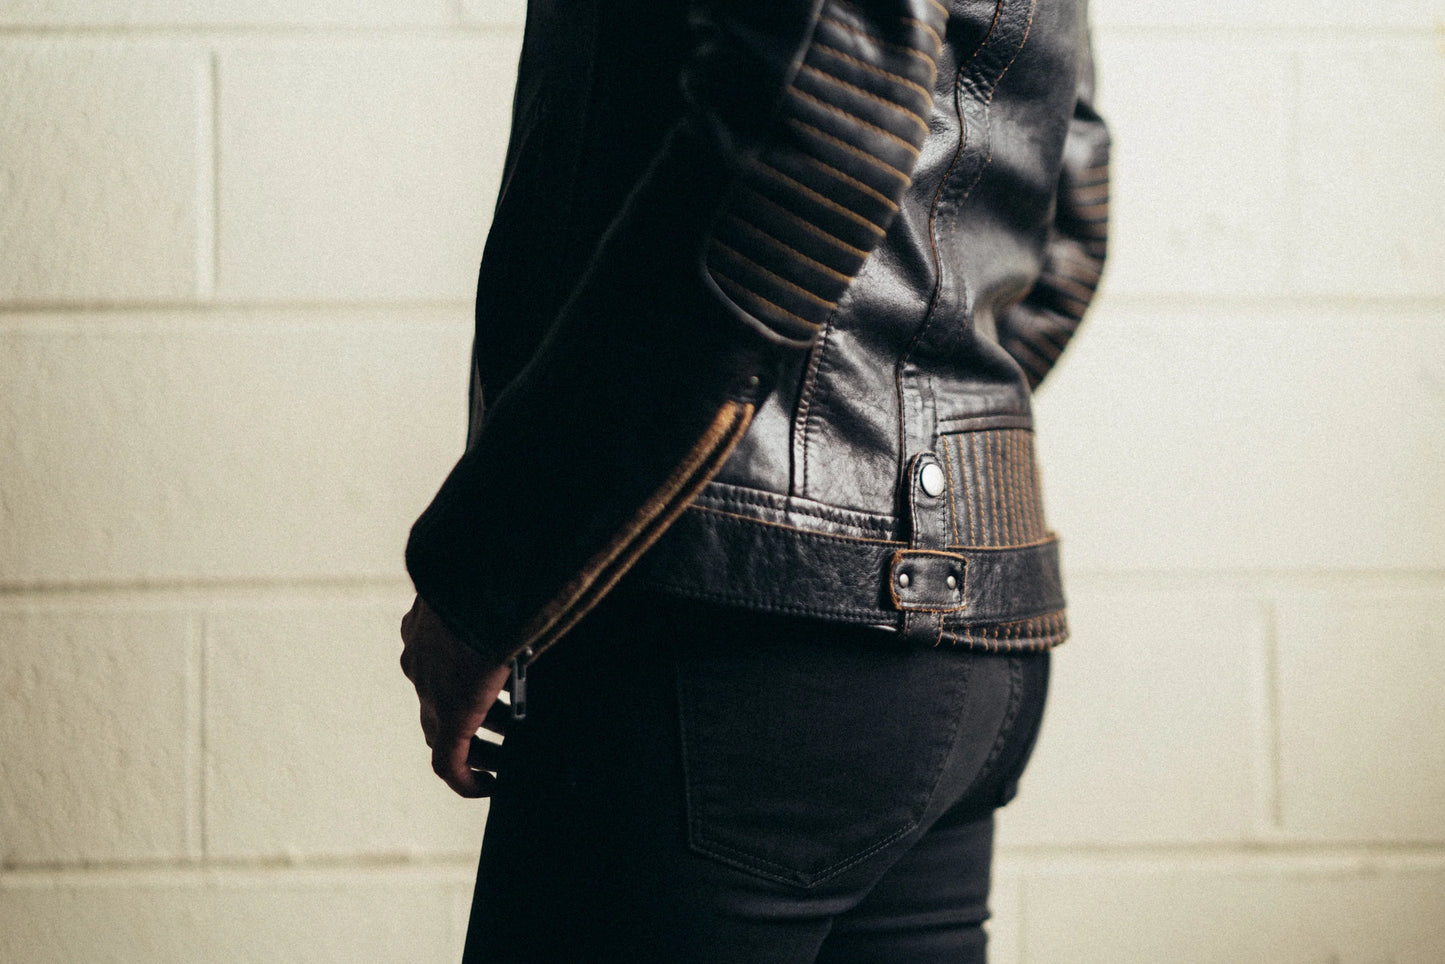 Back view of woman wearing Electra Leather Motorcycle Jacket, highlighting the design and silhouette from behind.